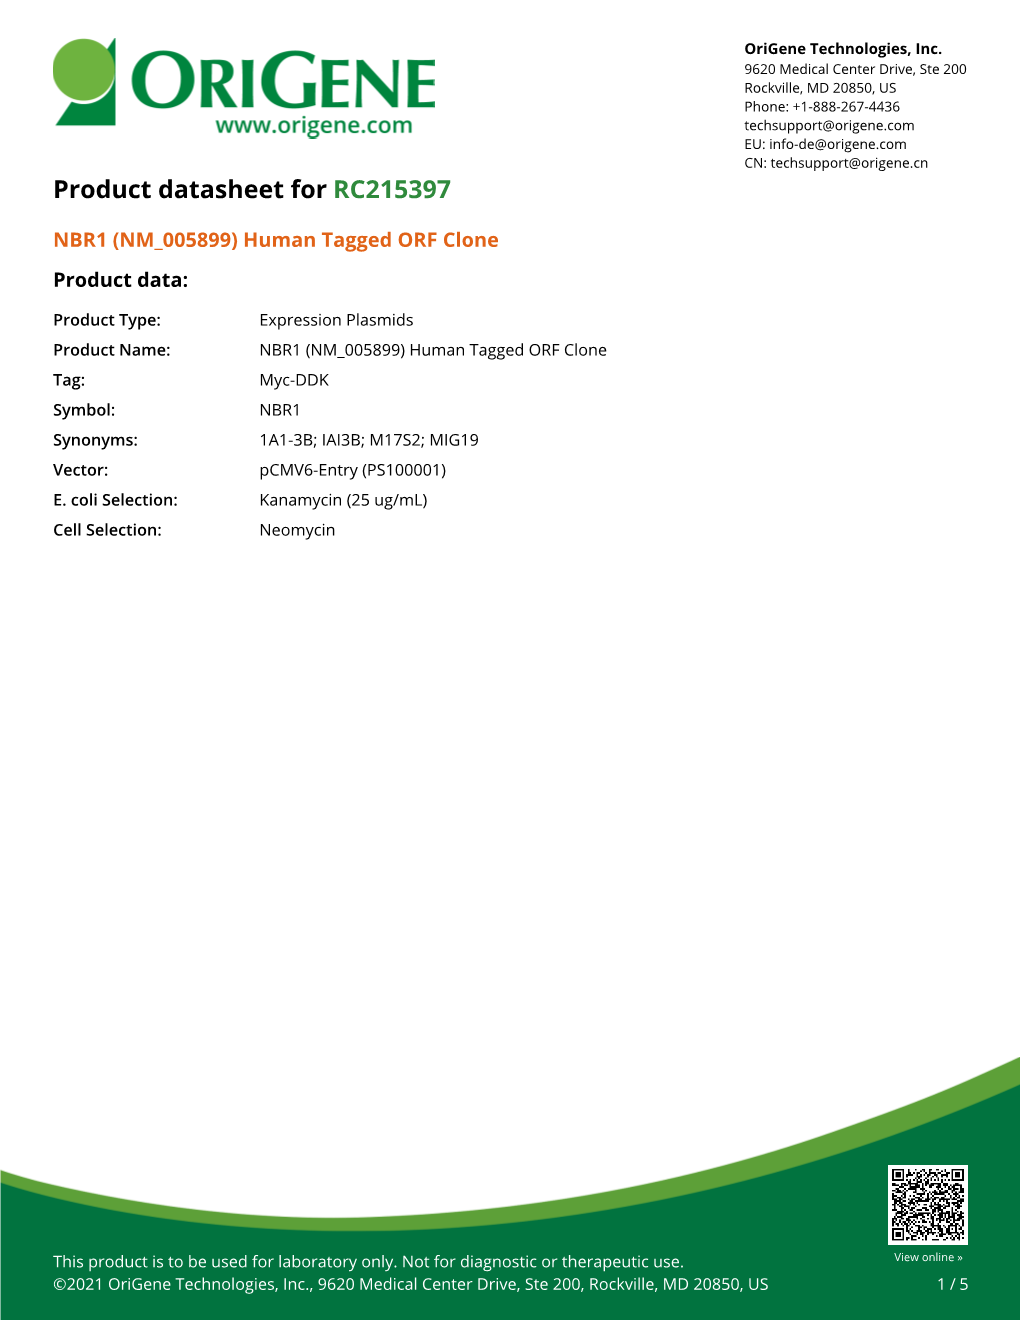 NBR1 (NM 005899) Human Tagged ORF Clone Product Data